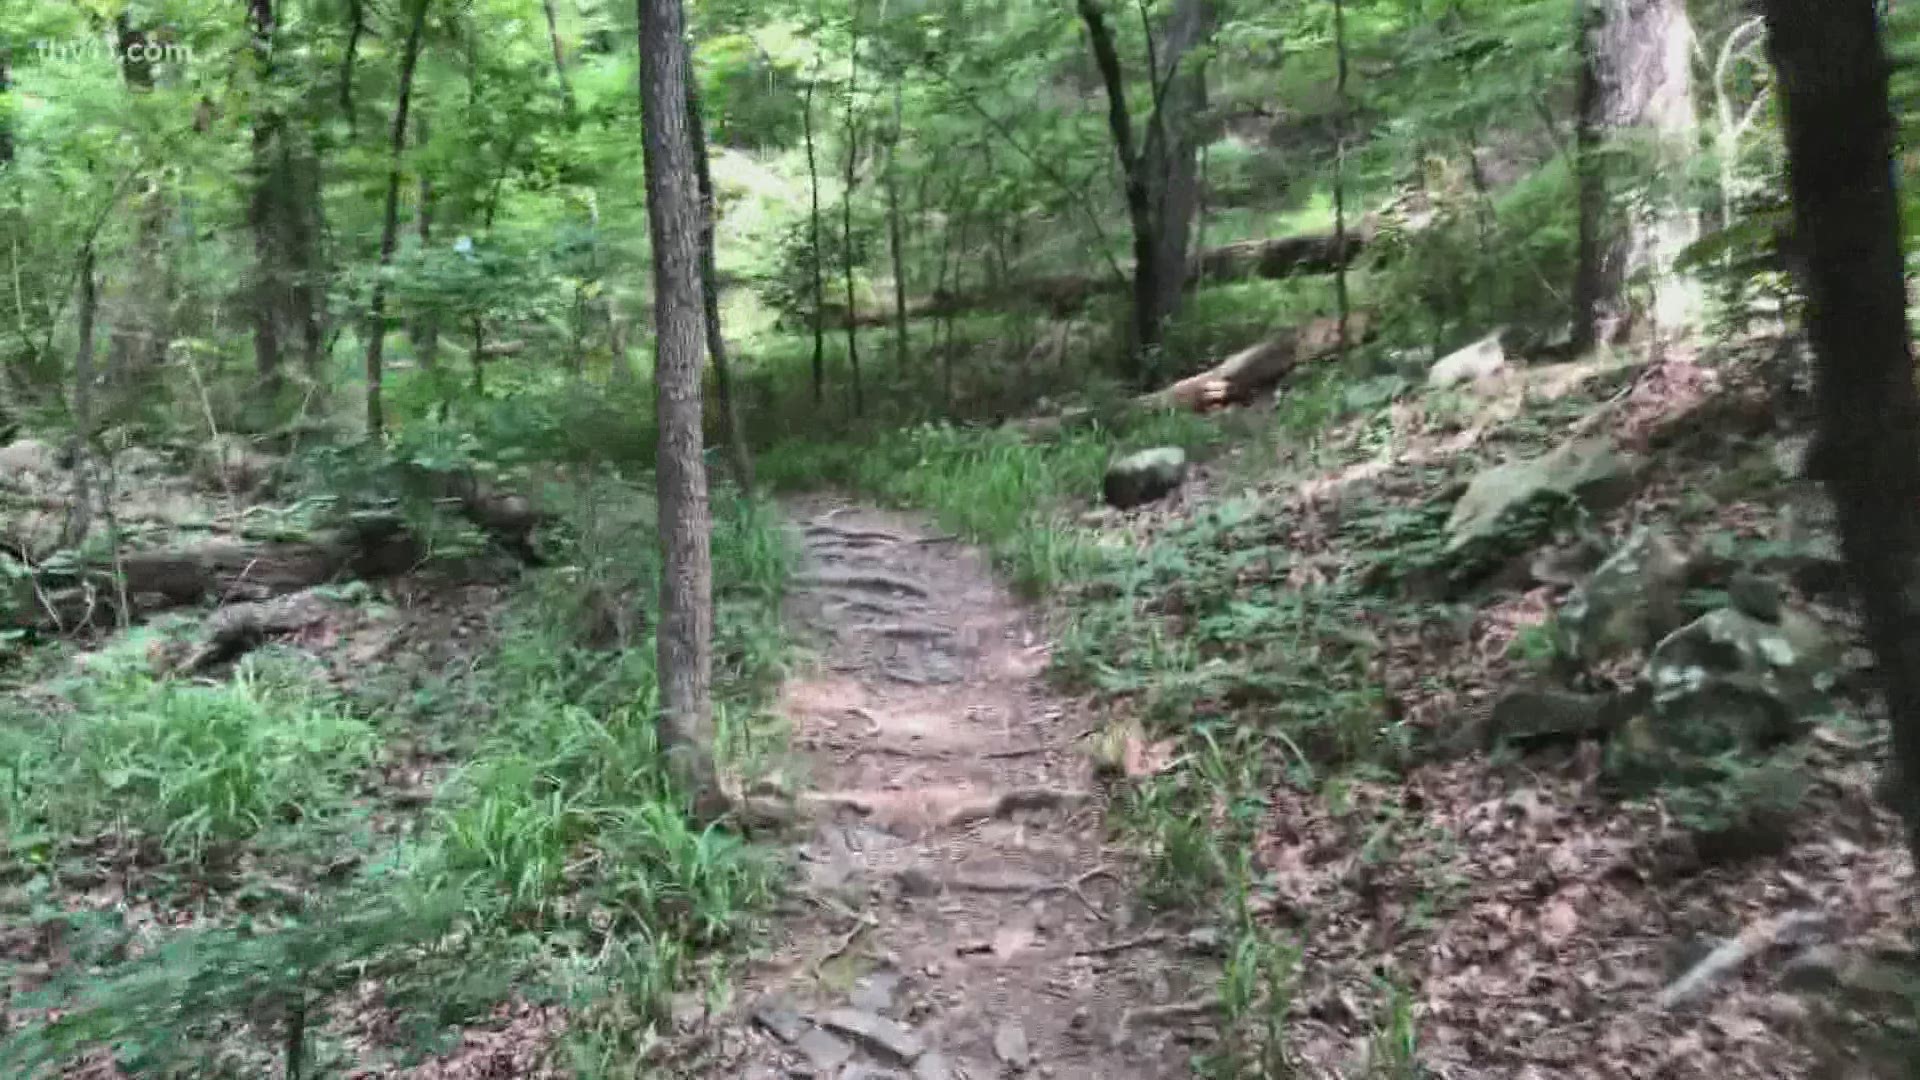 Ashley King and her family take a trip down the River Mountain Trail to Discover Arkansas.